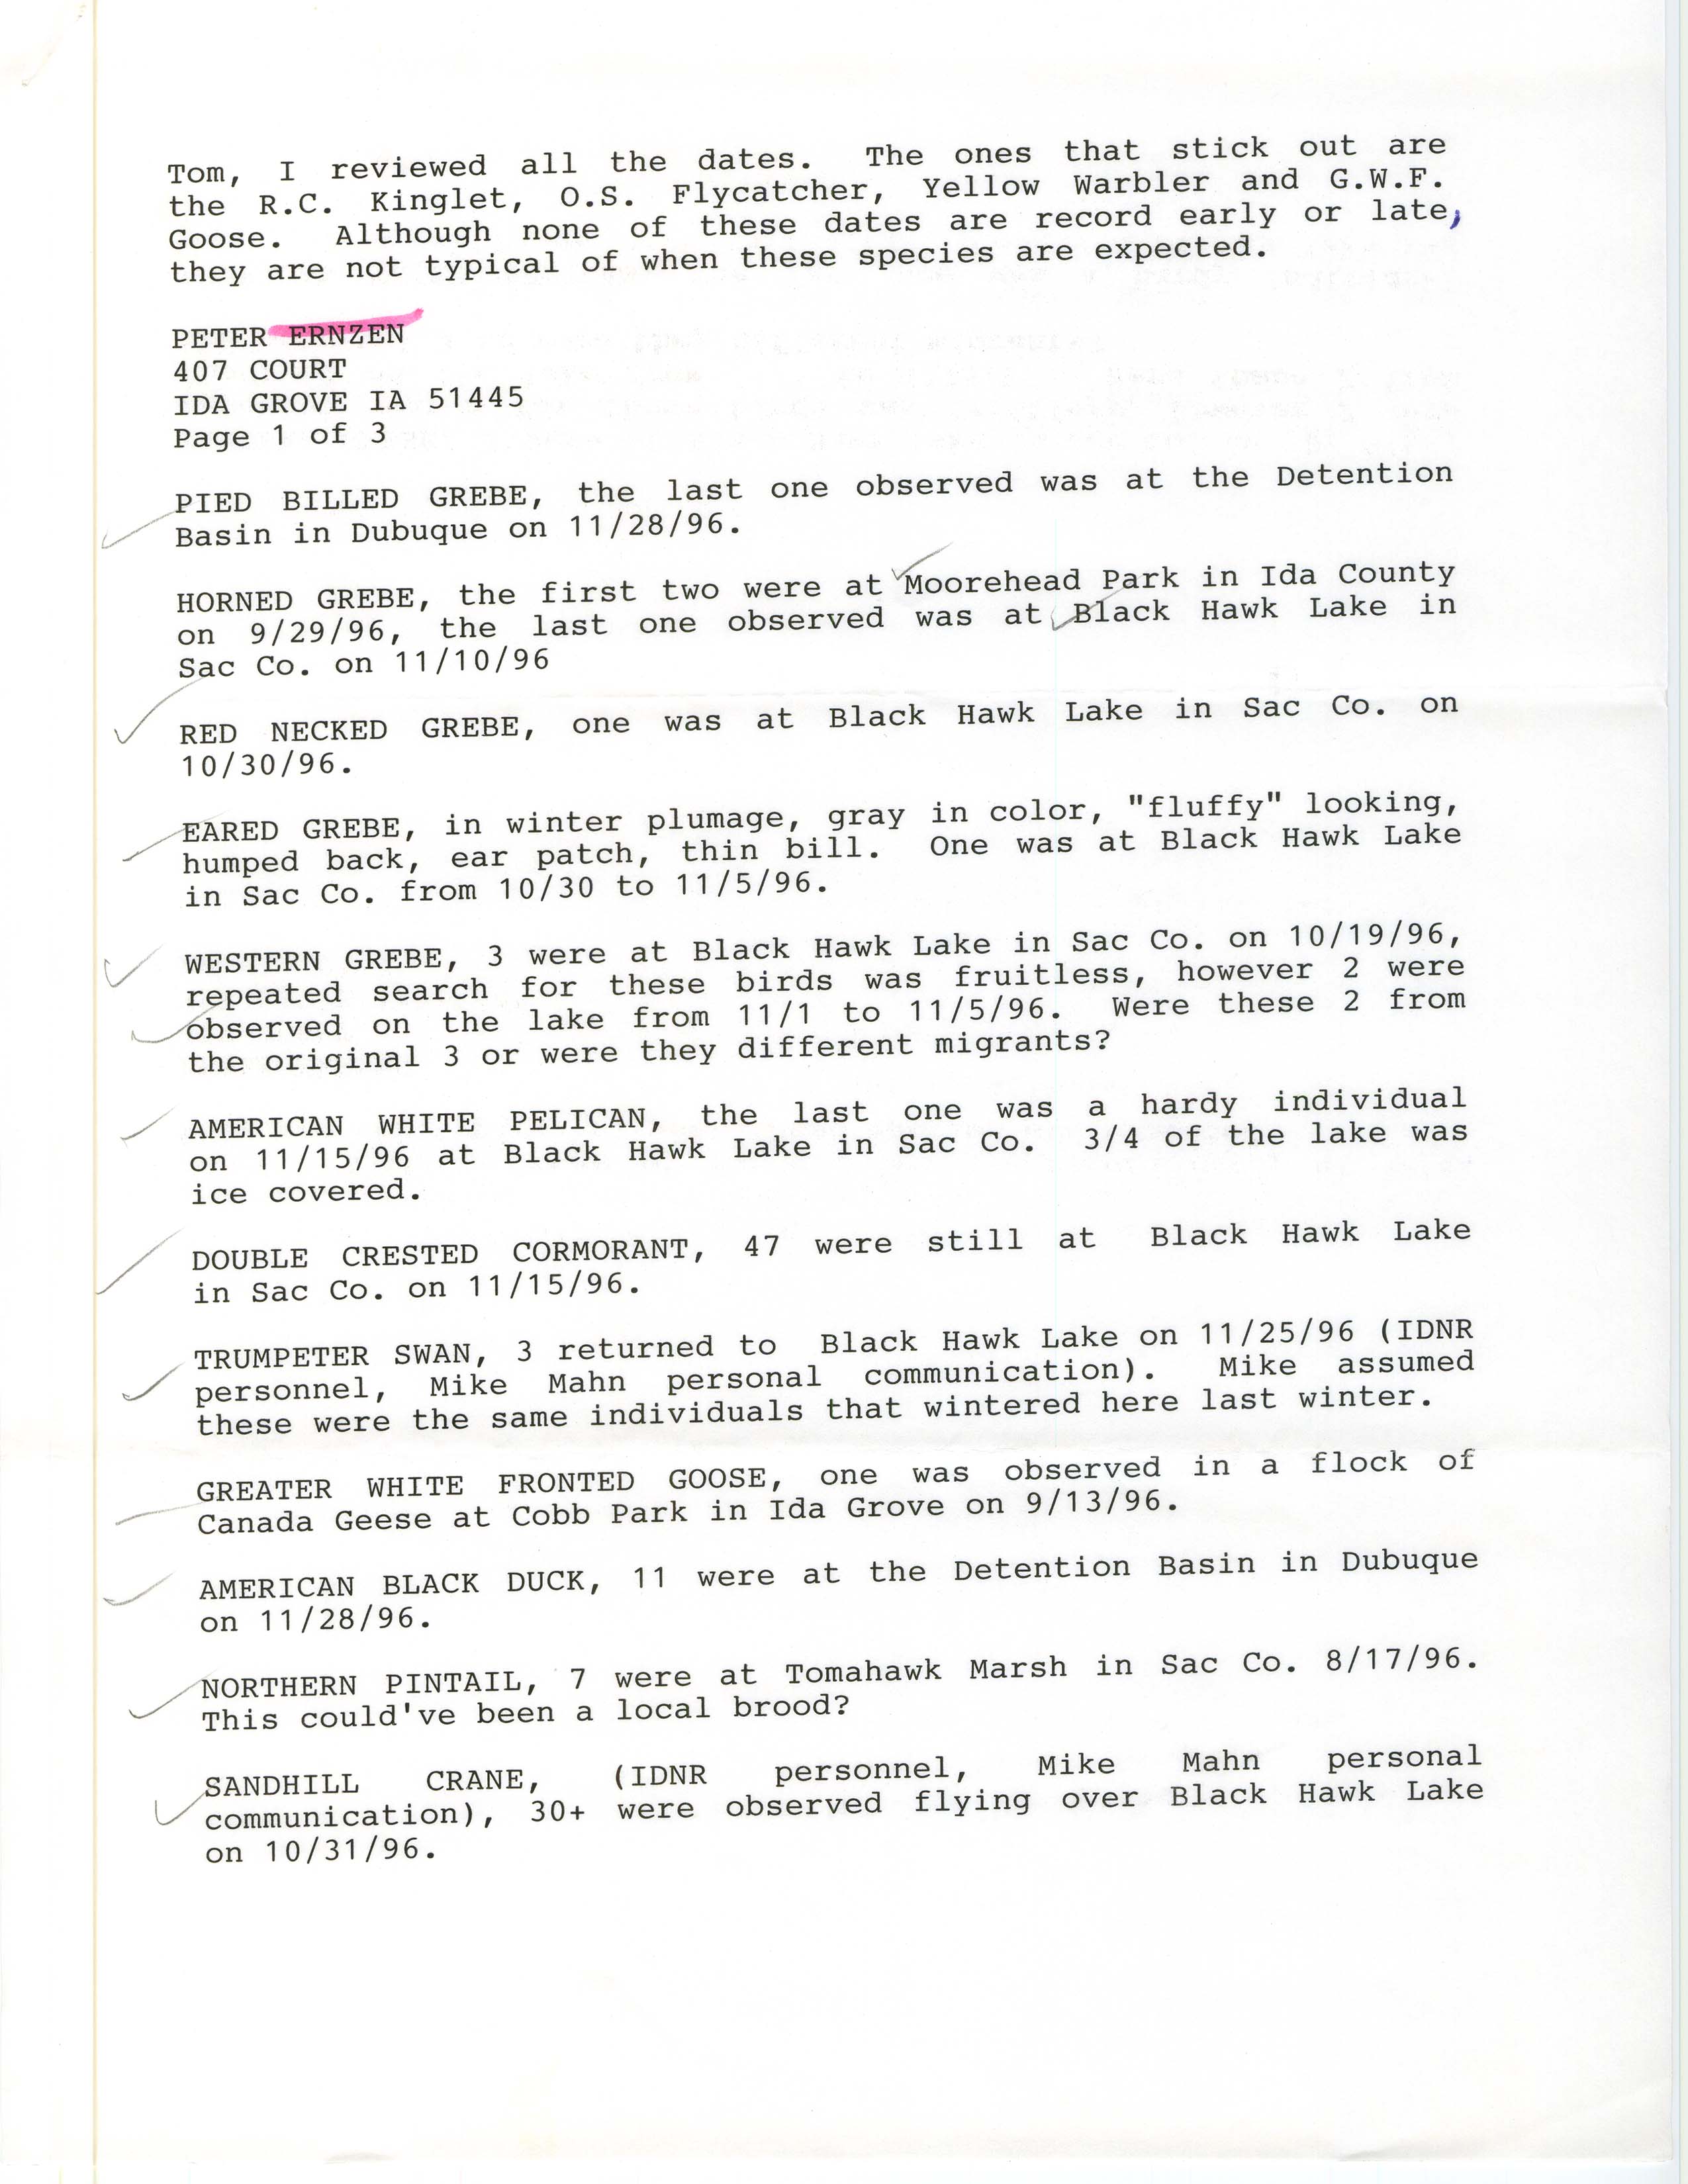 Field notes contributed by Peter Ernzen, fall 1996